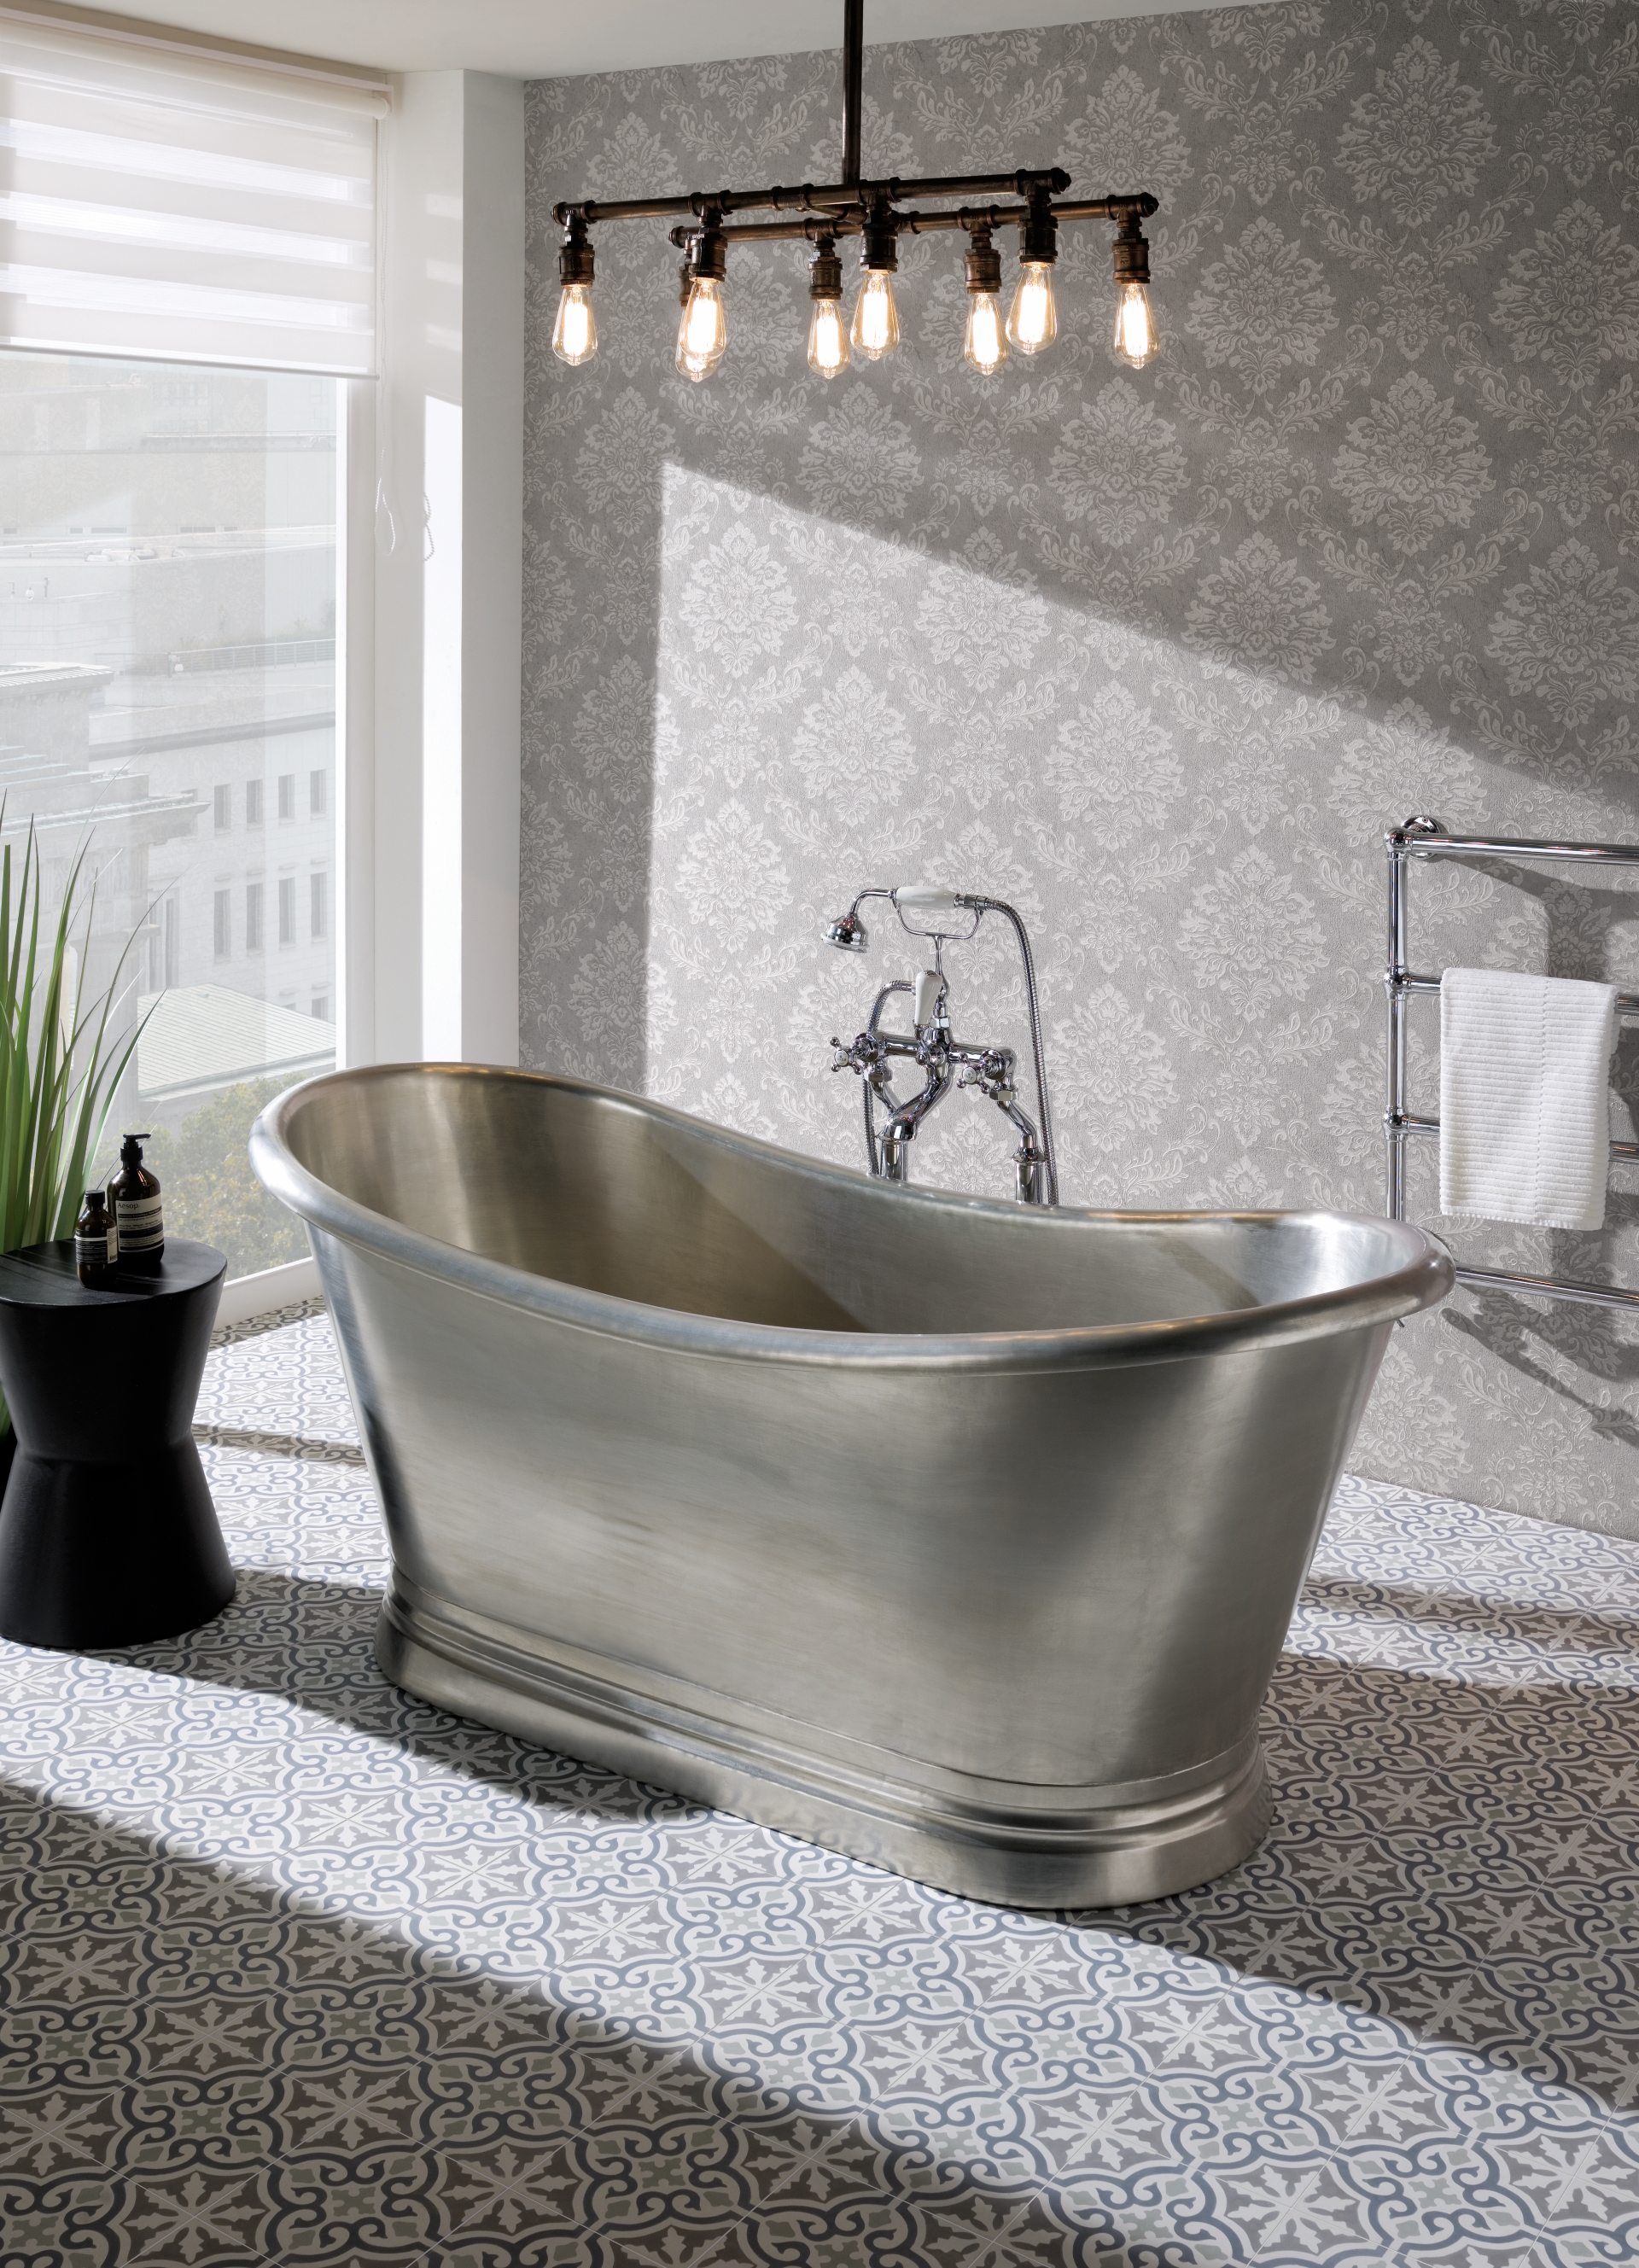 Product Lifestyle image of BC Designs 1500mm Tin Freestanding Boat Bath